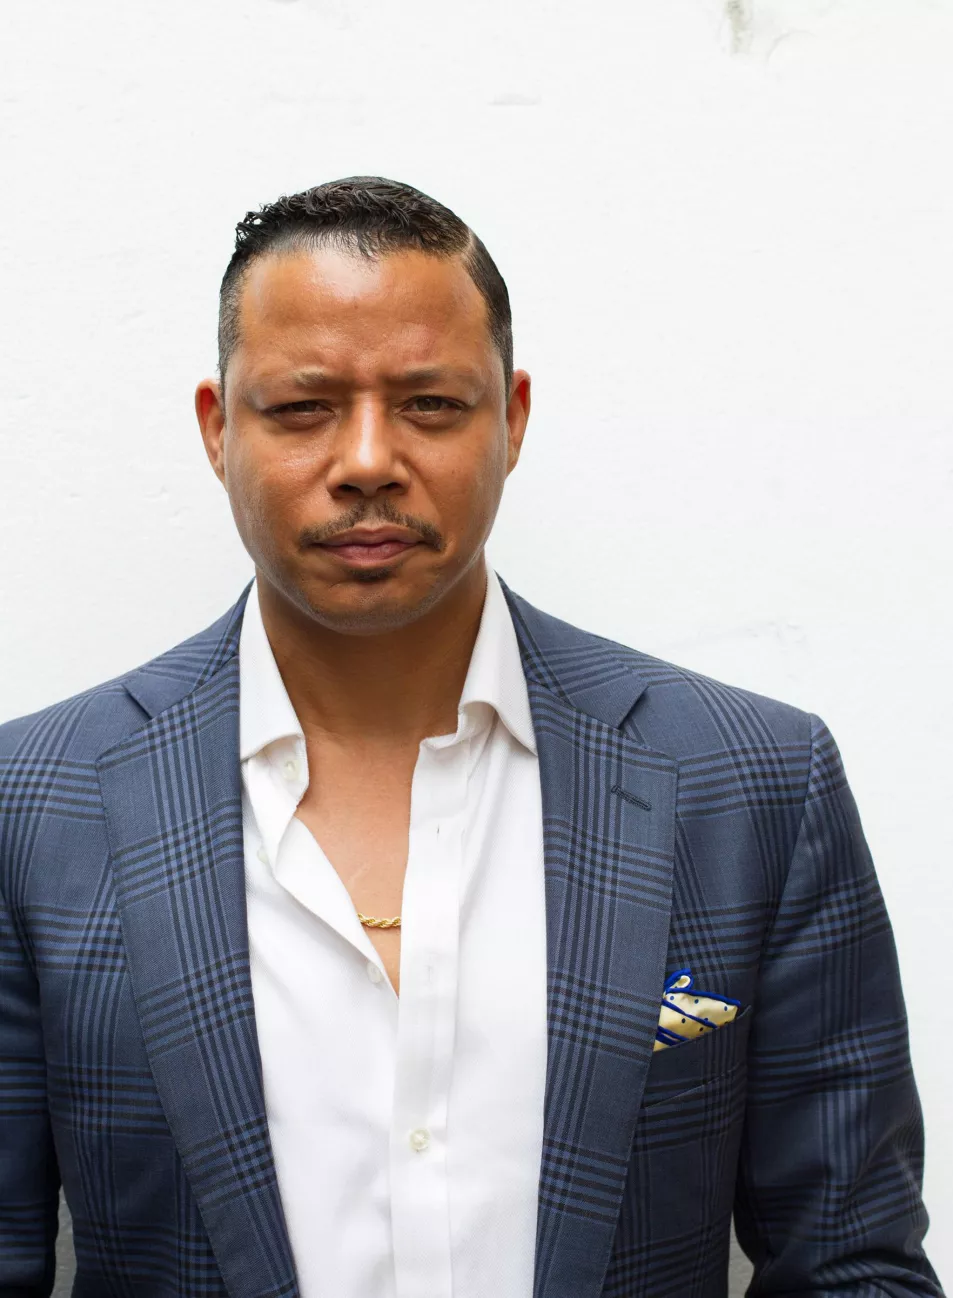 actor Terrence Howard sporting a pencil moustache